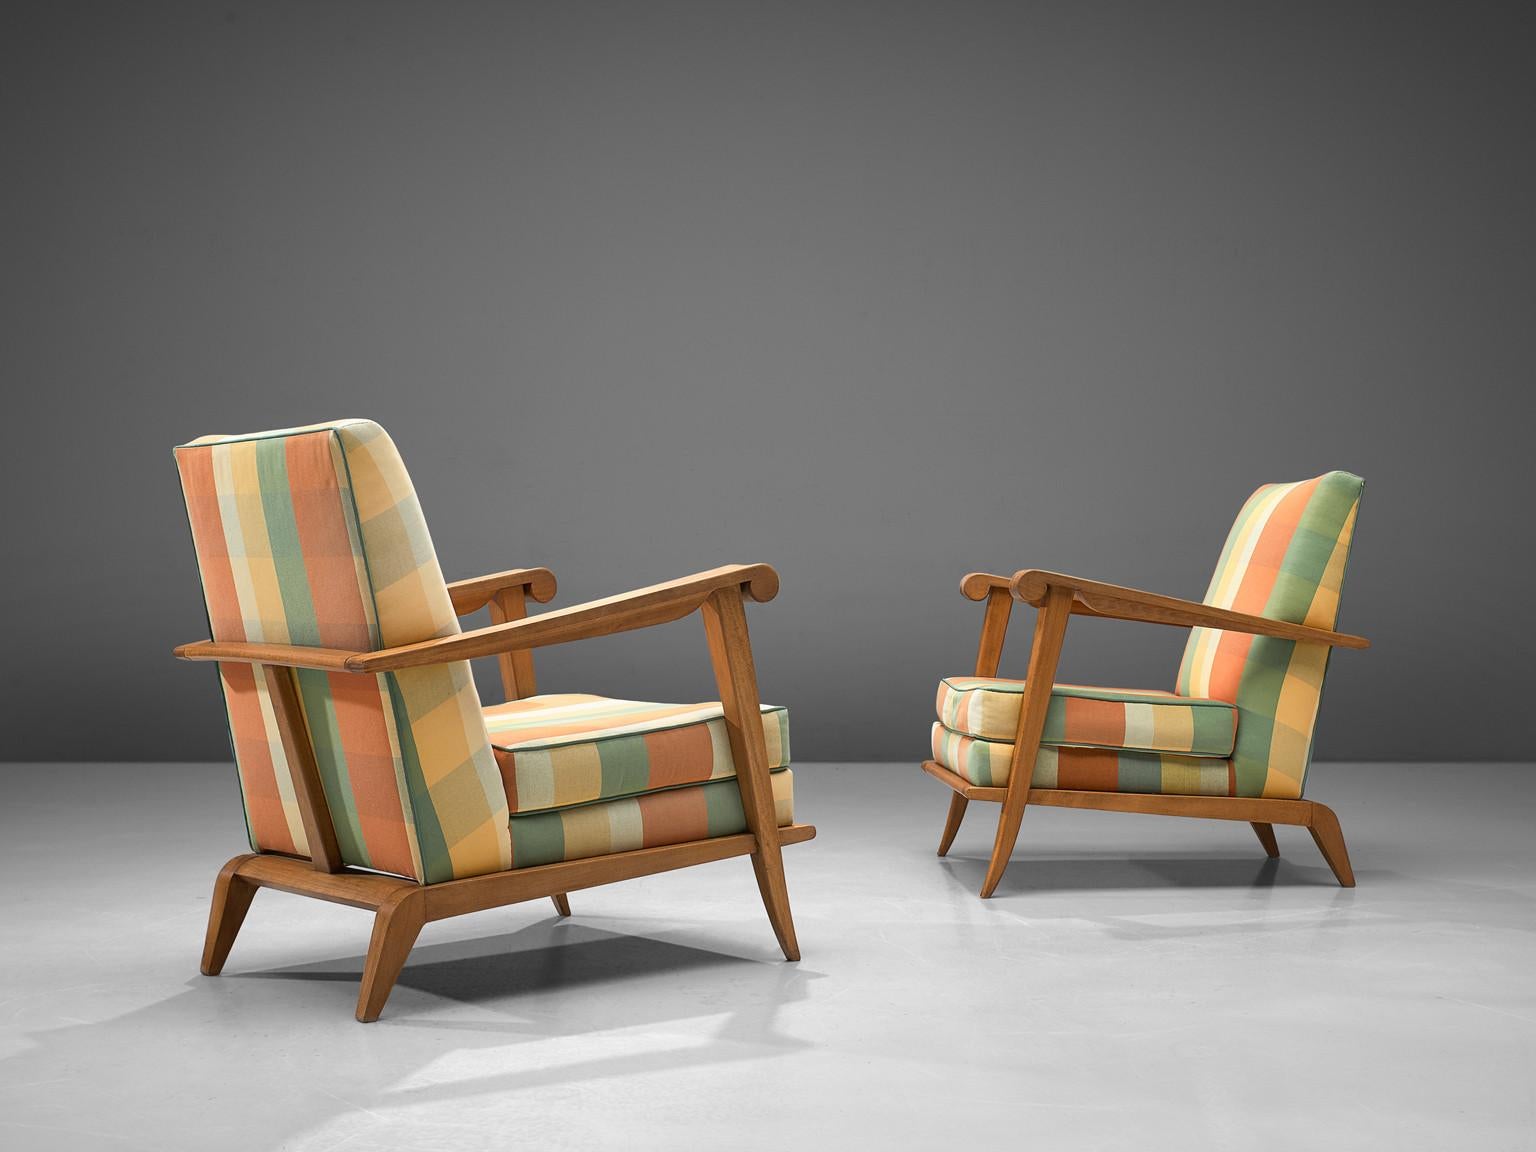 Pair of lounge chairs, oak, fabric, France, 1950s

Outstanding set of lounge chairs have a striped/ blocked upholstery with a solid oak sculptural frame. The chairs are finished with an additional cushion in the seat for extra comfort. The rounded